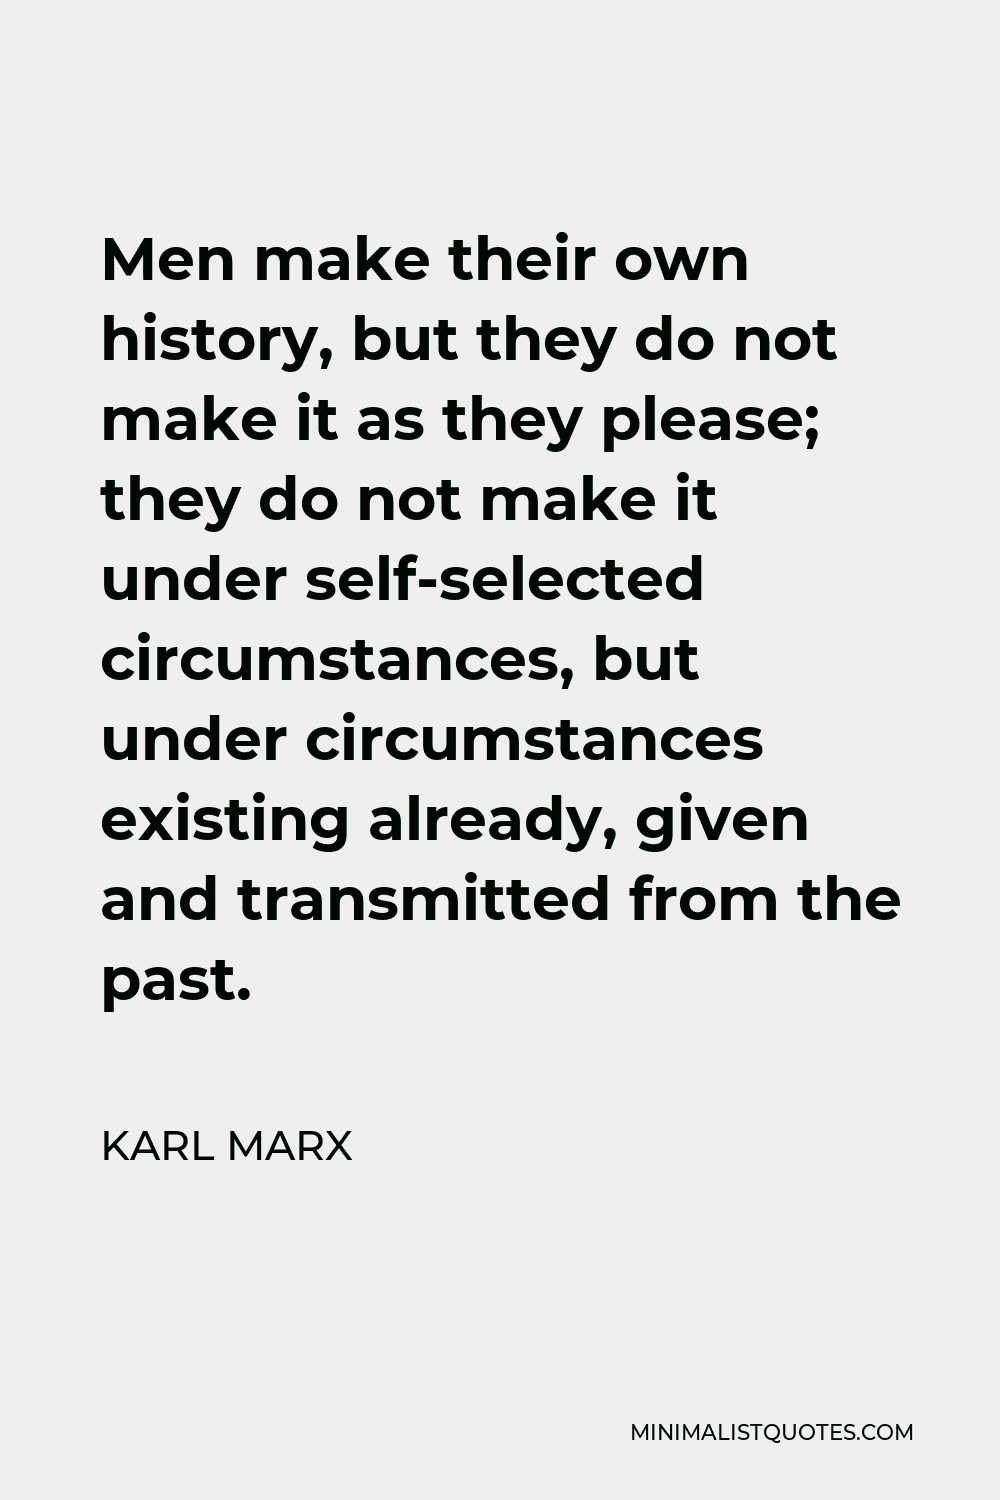 Karl Marx Quote - Men make their own history, but they do not make it as they please; they do not make it under self-selected circumstances, but under circumstances existing already, given and transmitted from the past.